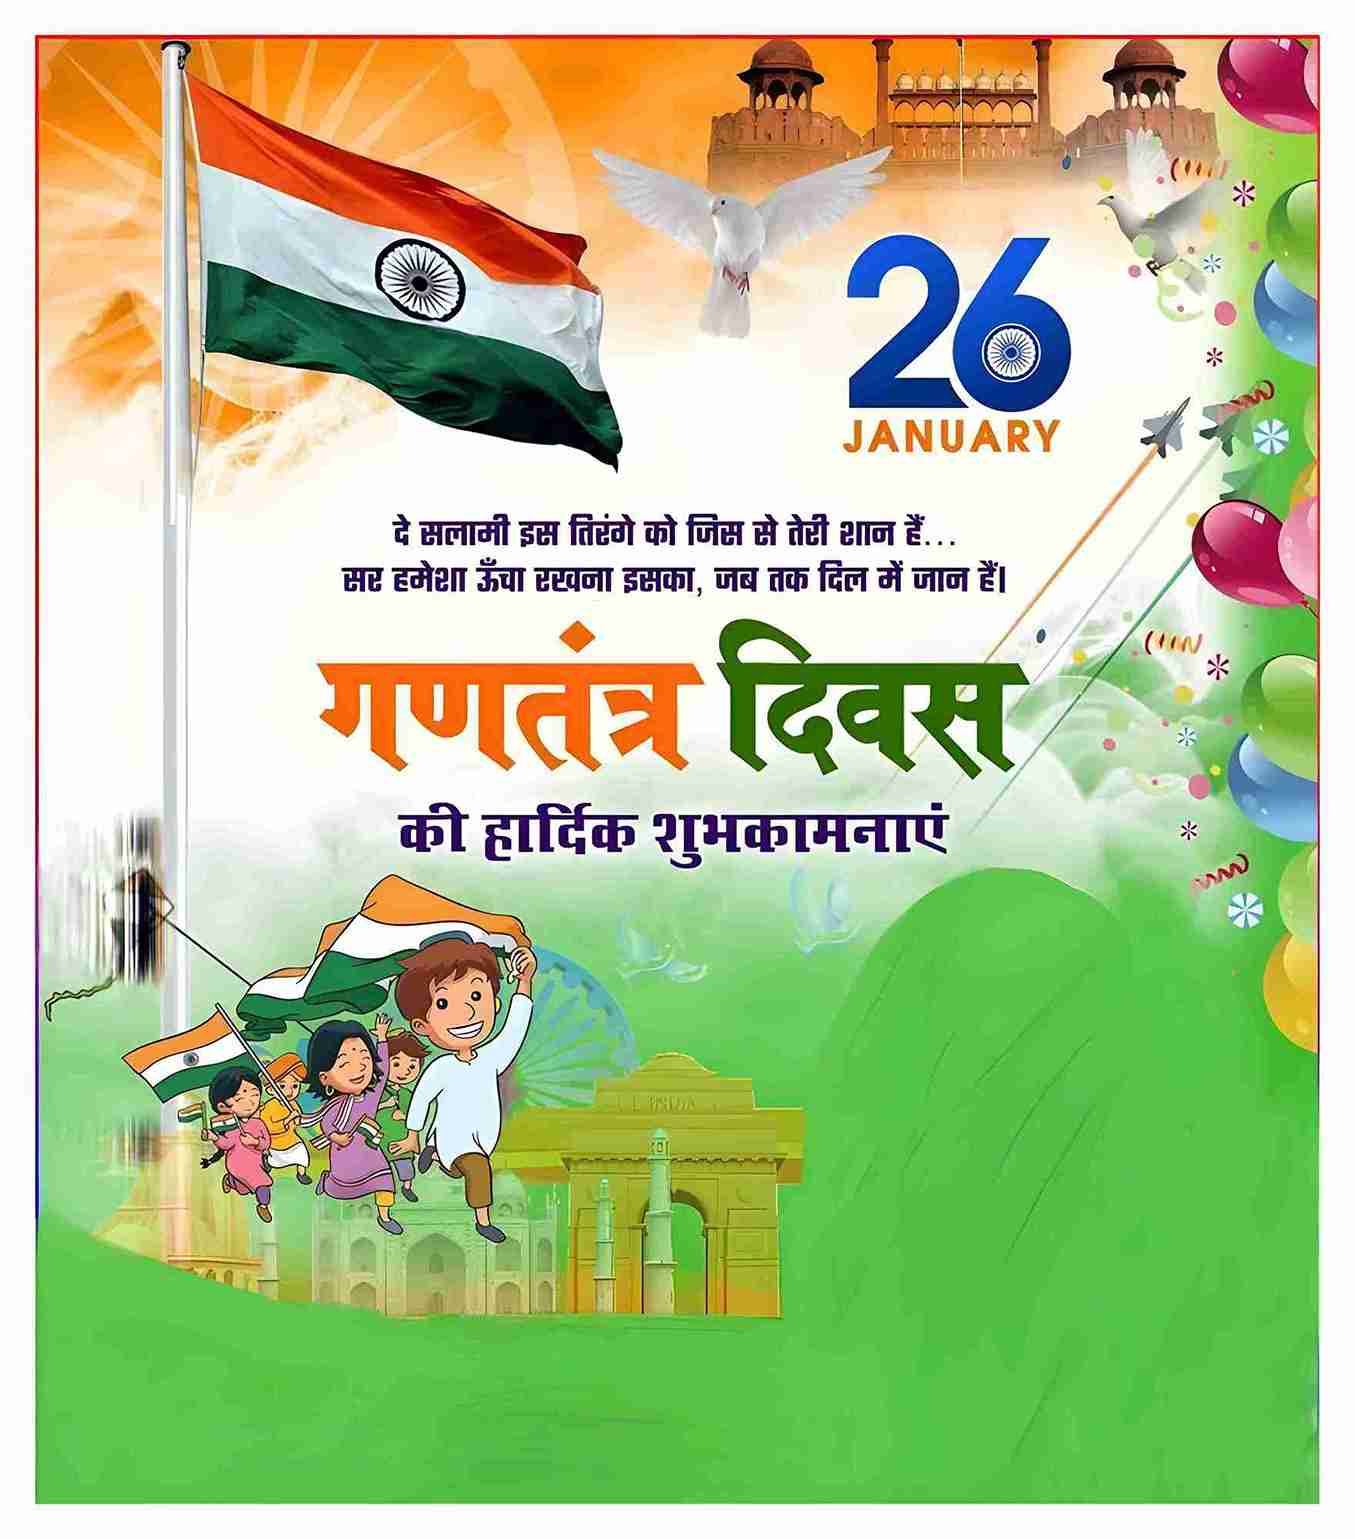 Republic day wishes banner background